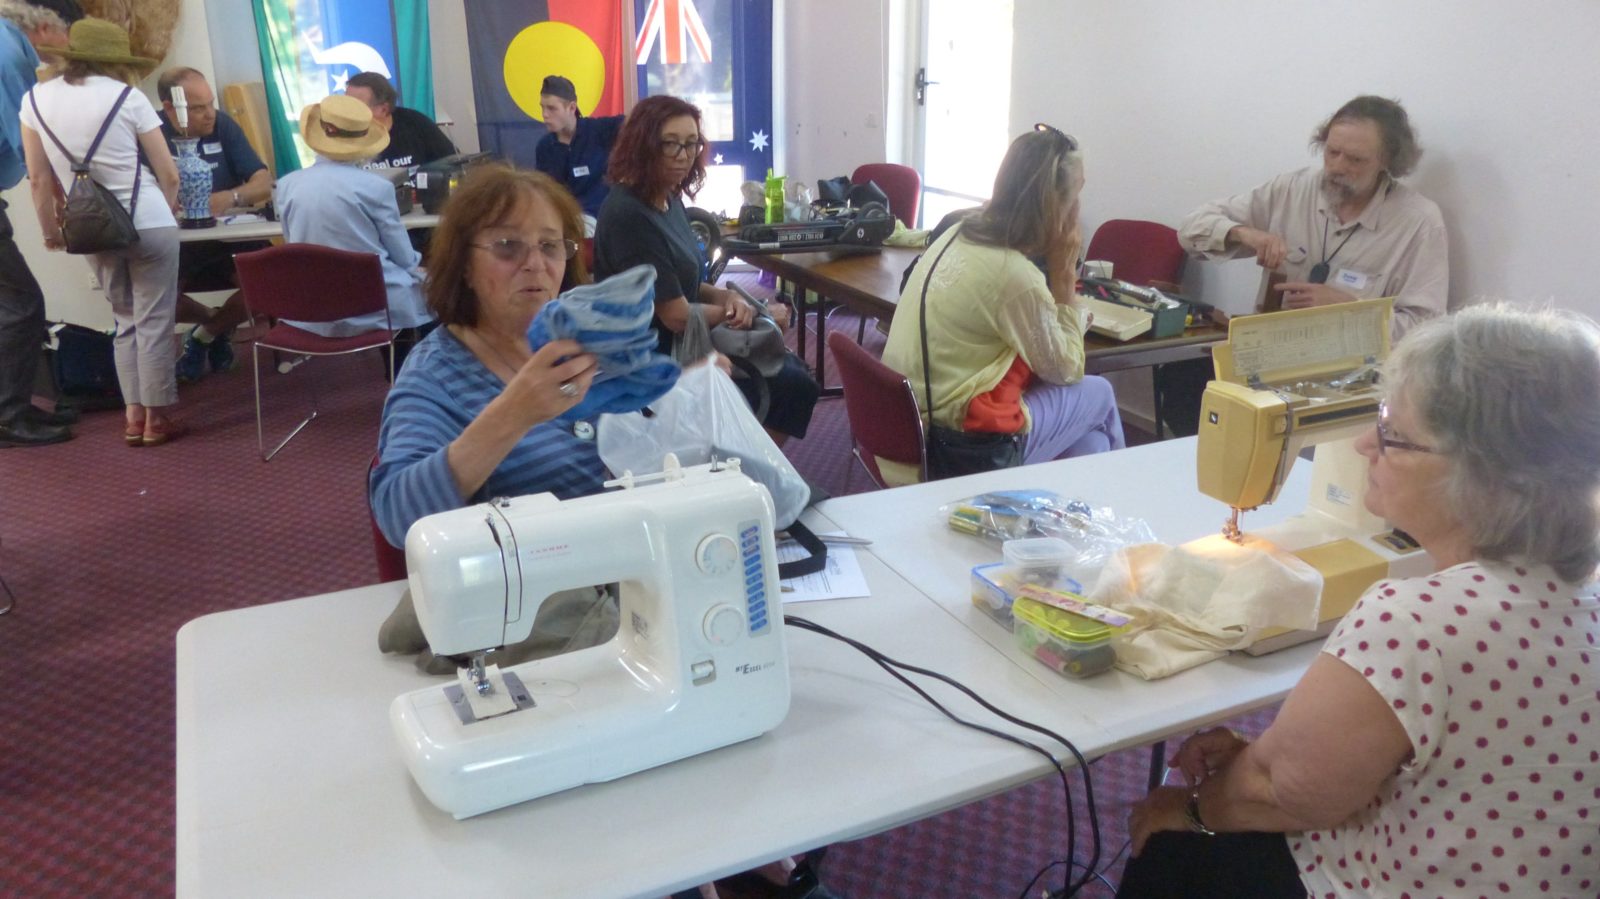 View of one of our repair cafes, with sewing machine in foreground and other fixers in background